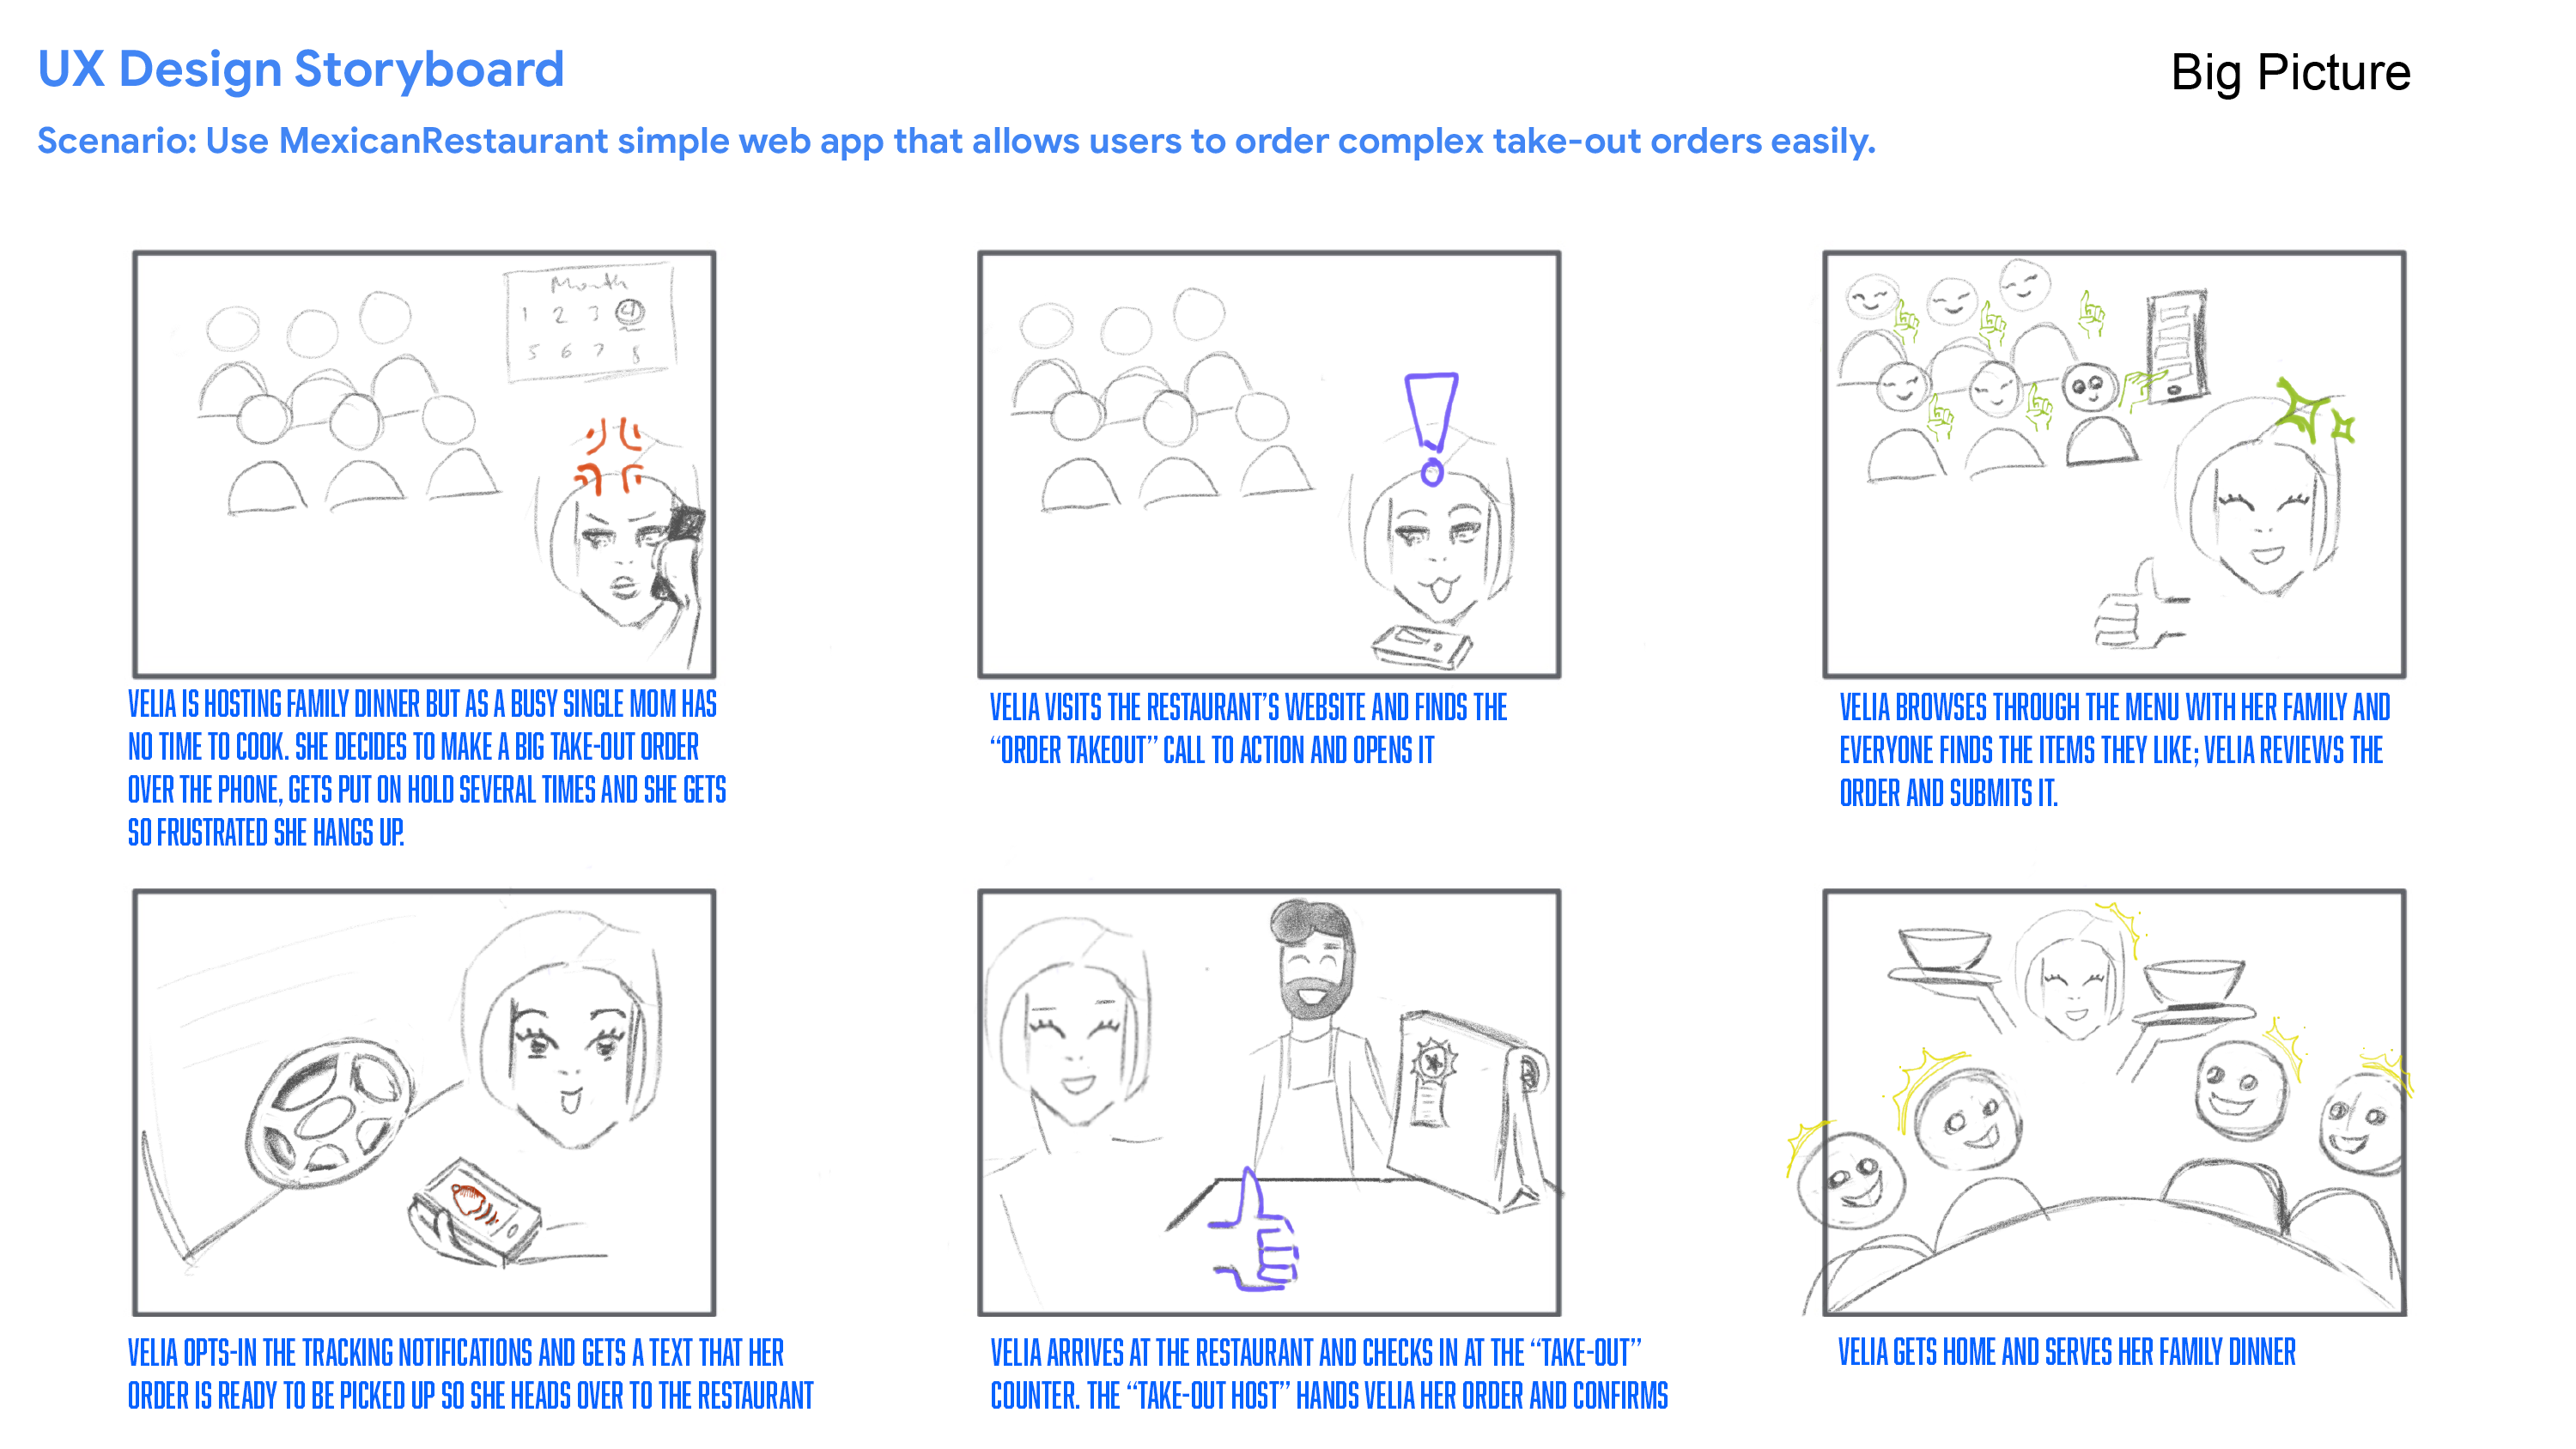 Big picture UX storyboard